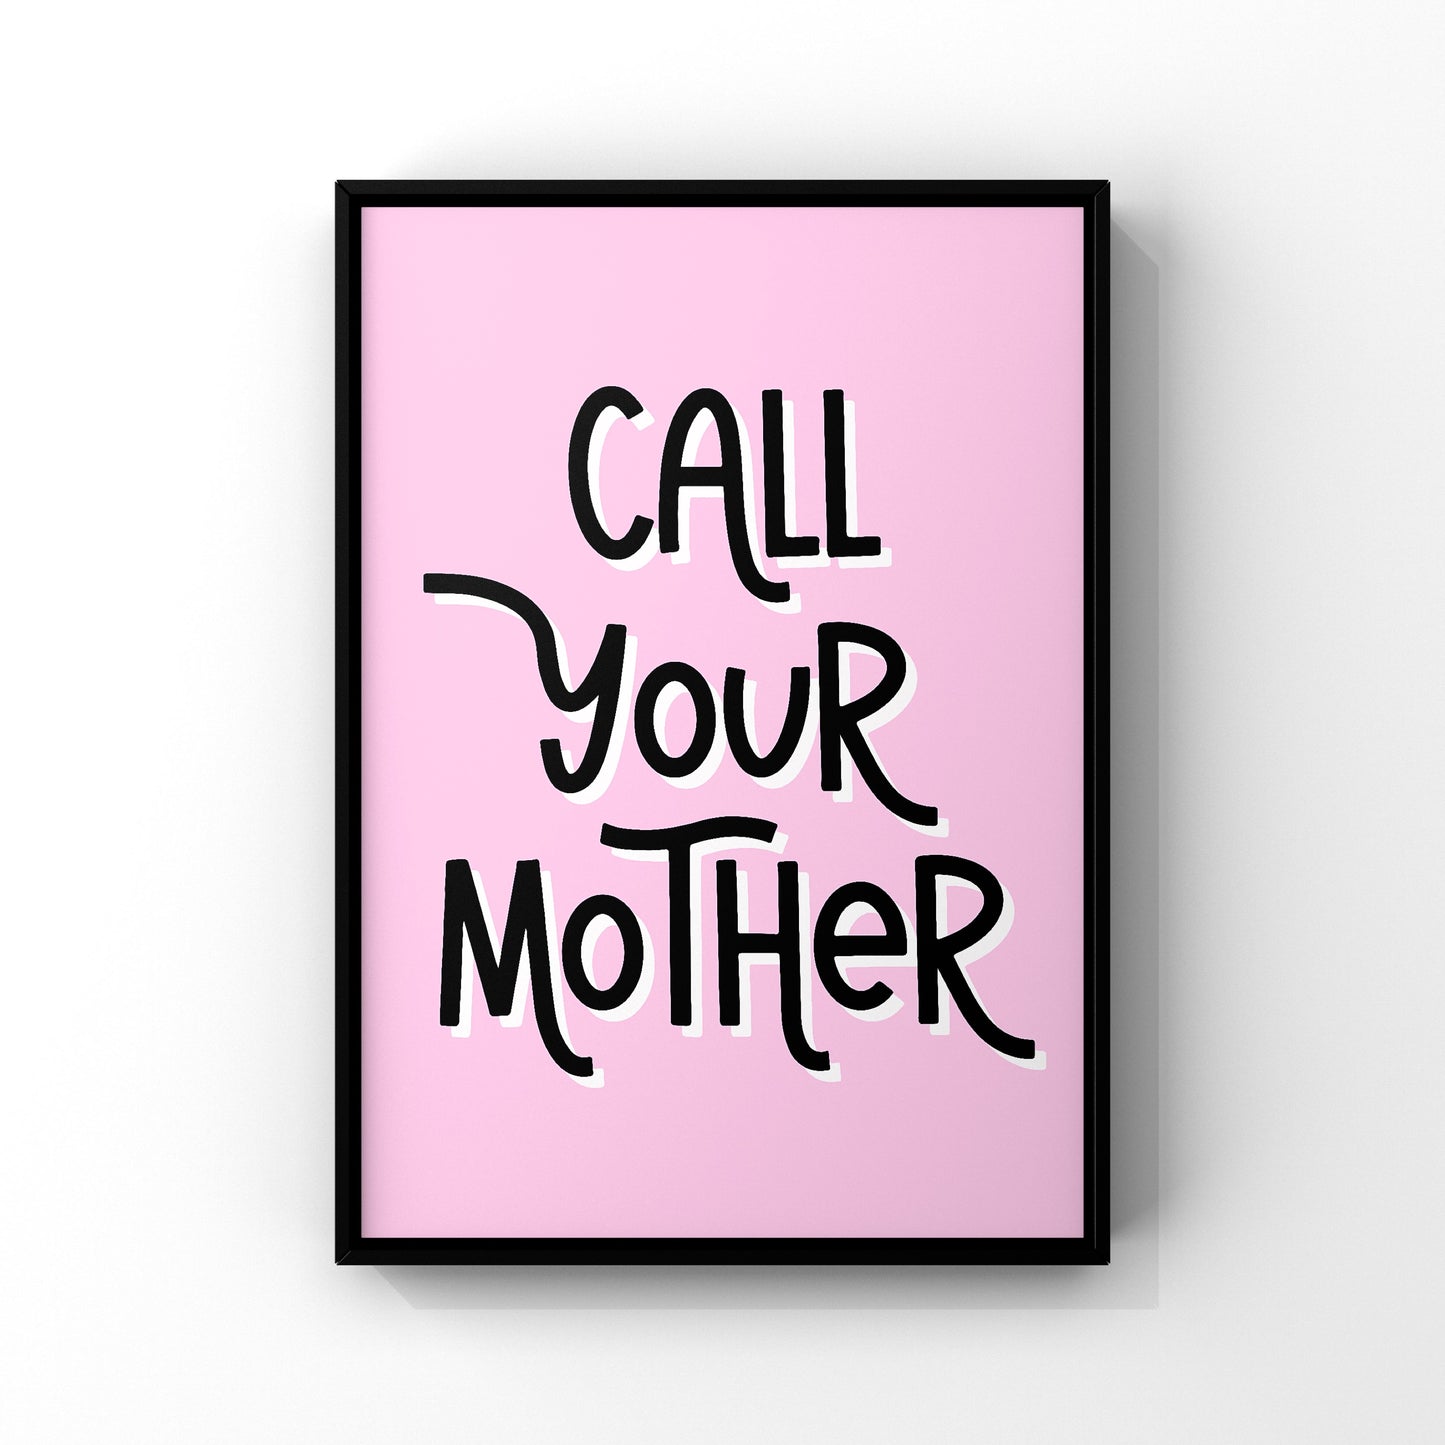 Call your mother